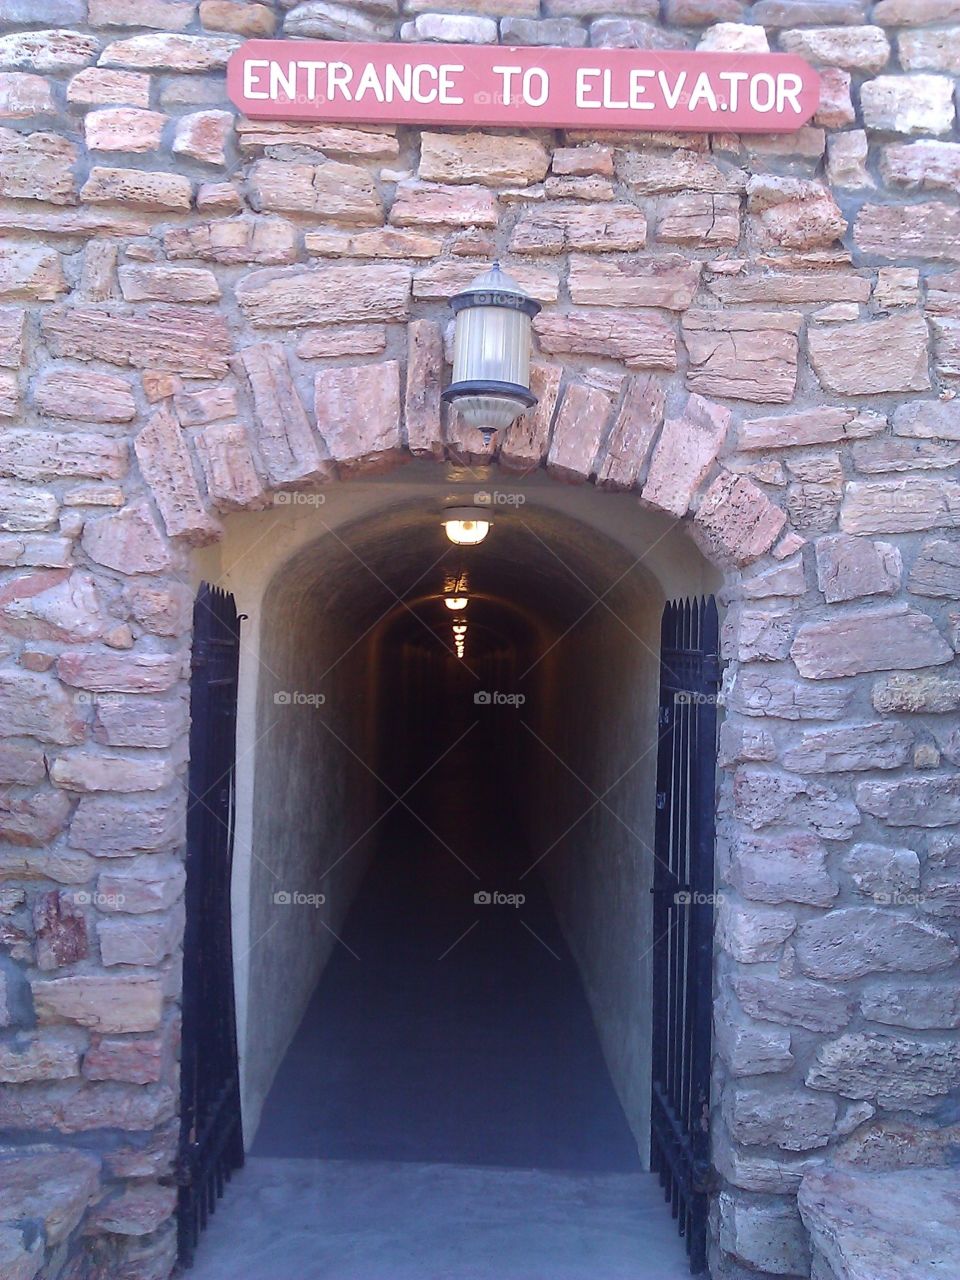 Spooky Tunnel Entrance. While in Death Valley, we stopped at the Furnace Inn, and this was their entrance to the elevator.